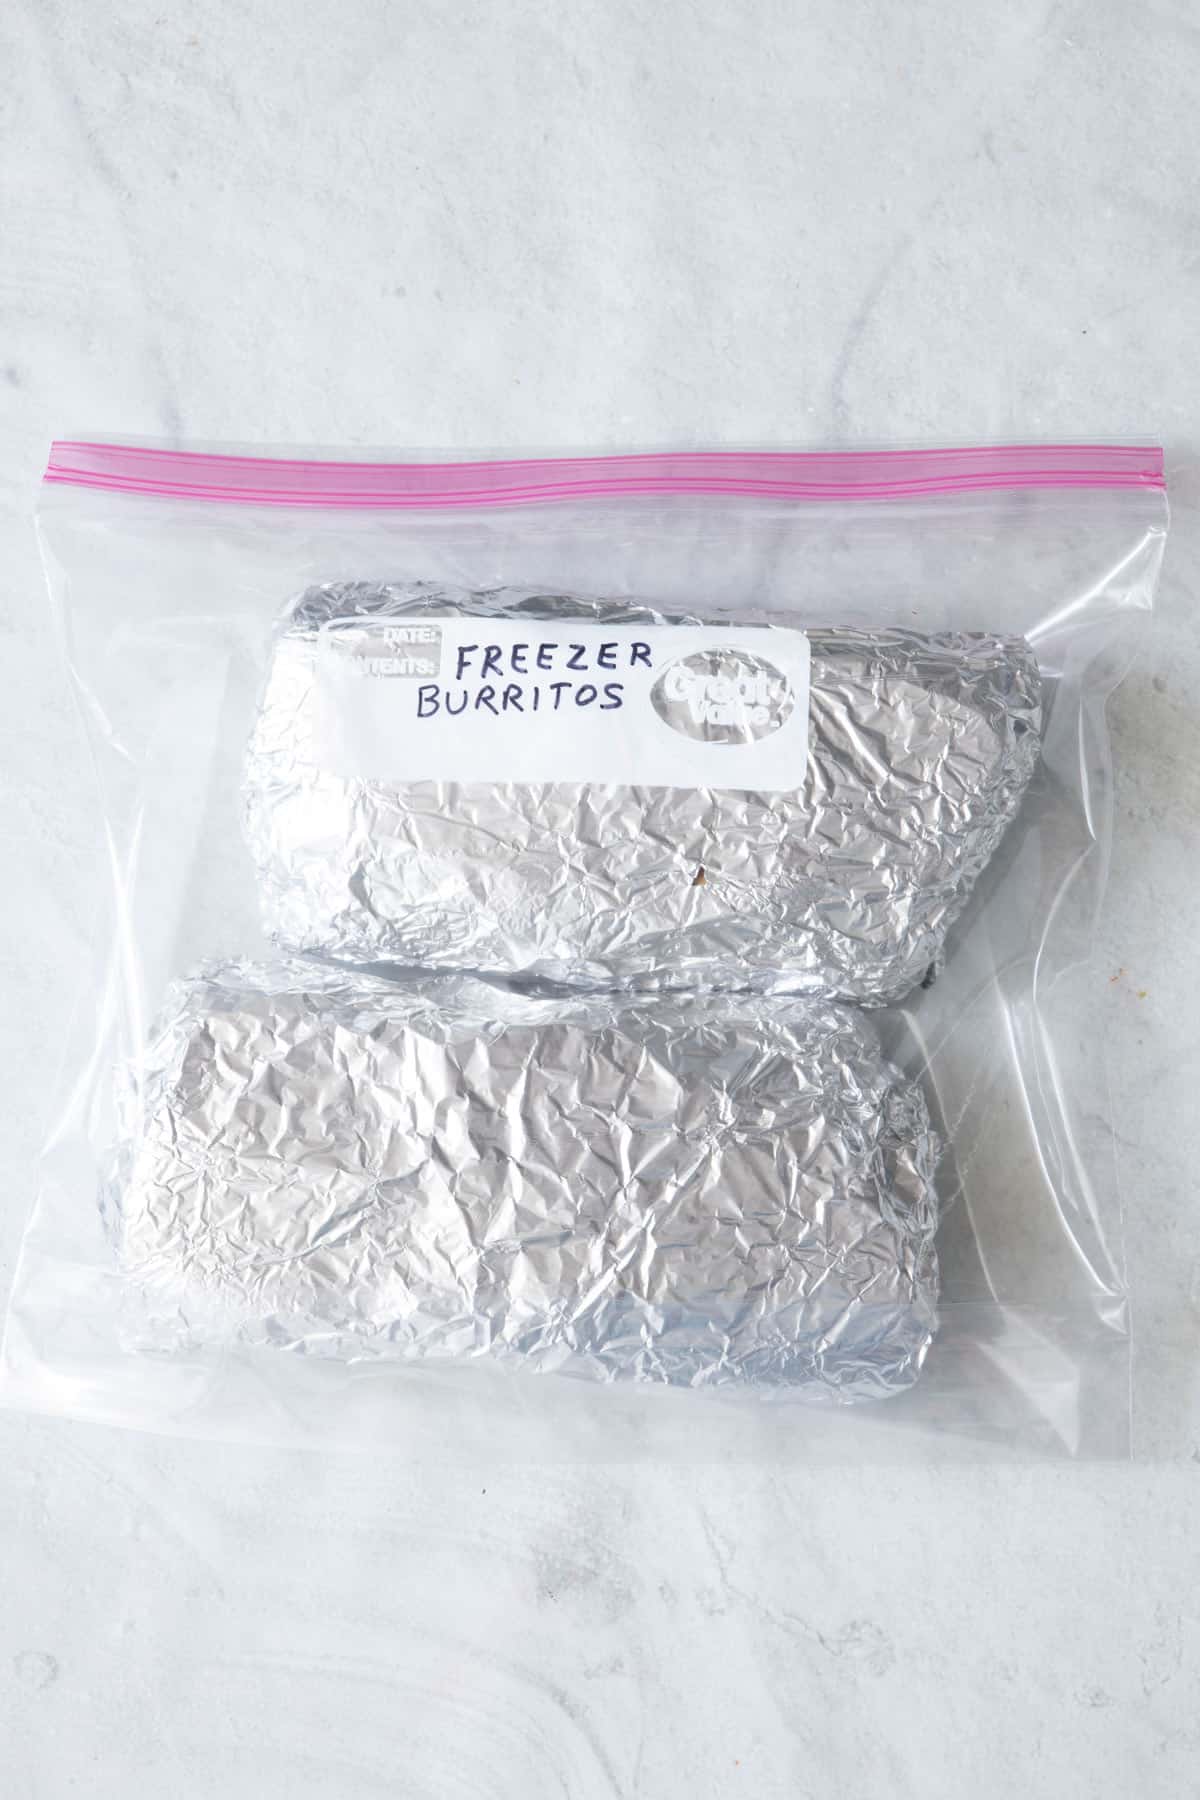 2 burritos wrapped in foil in a zip top bag.